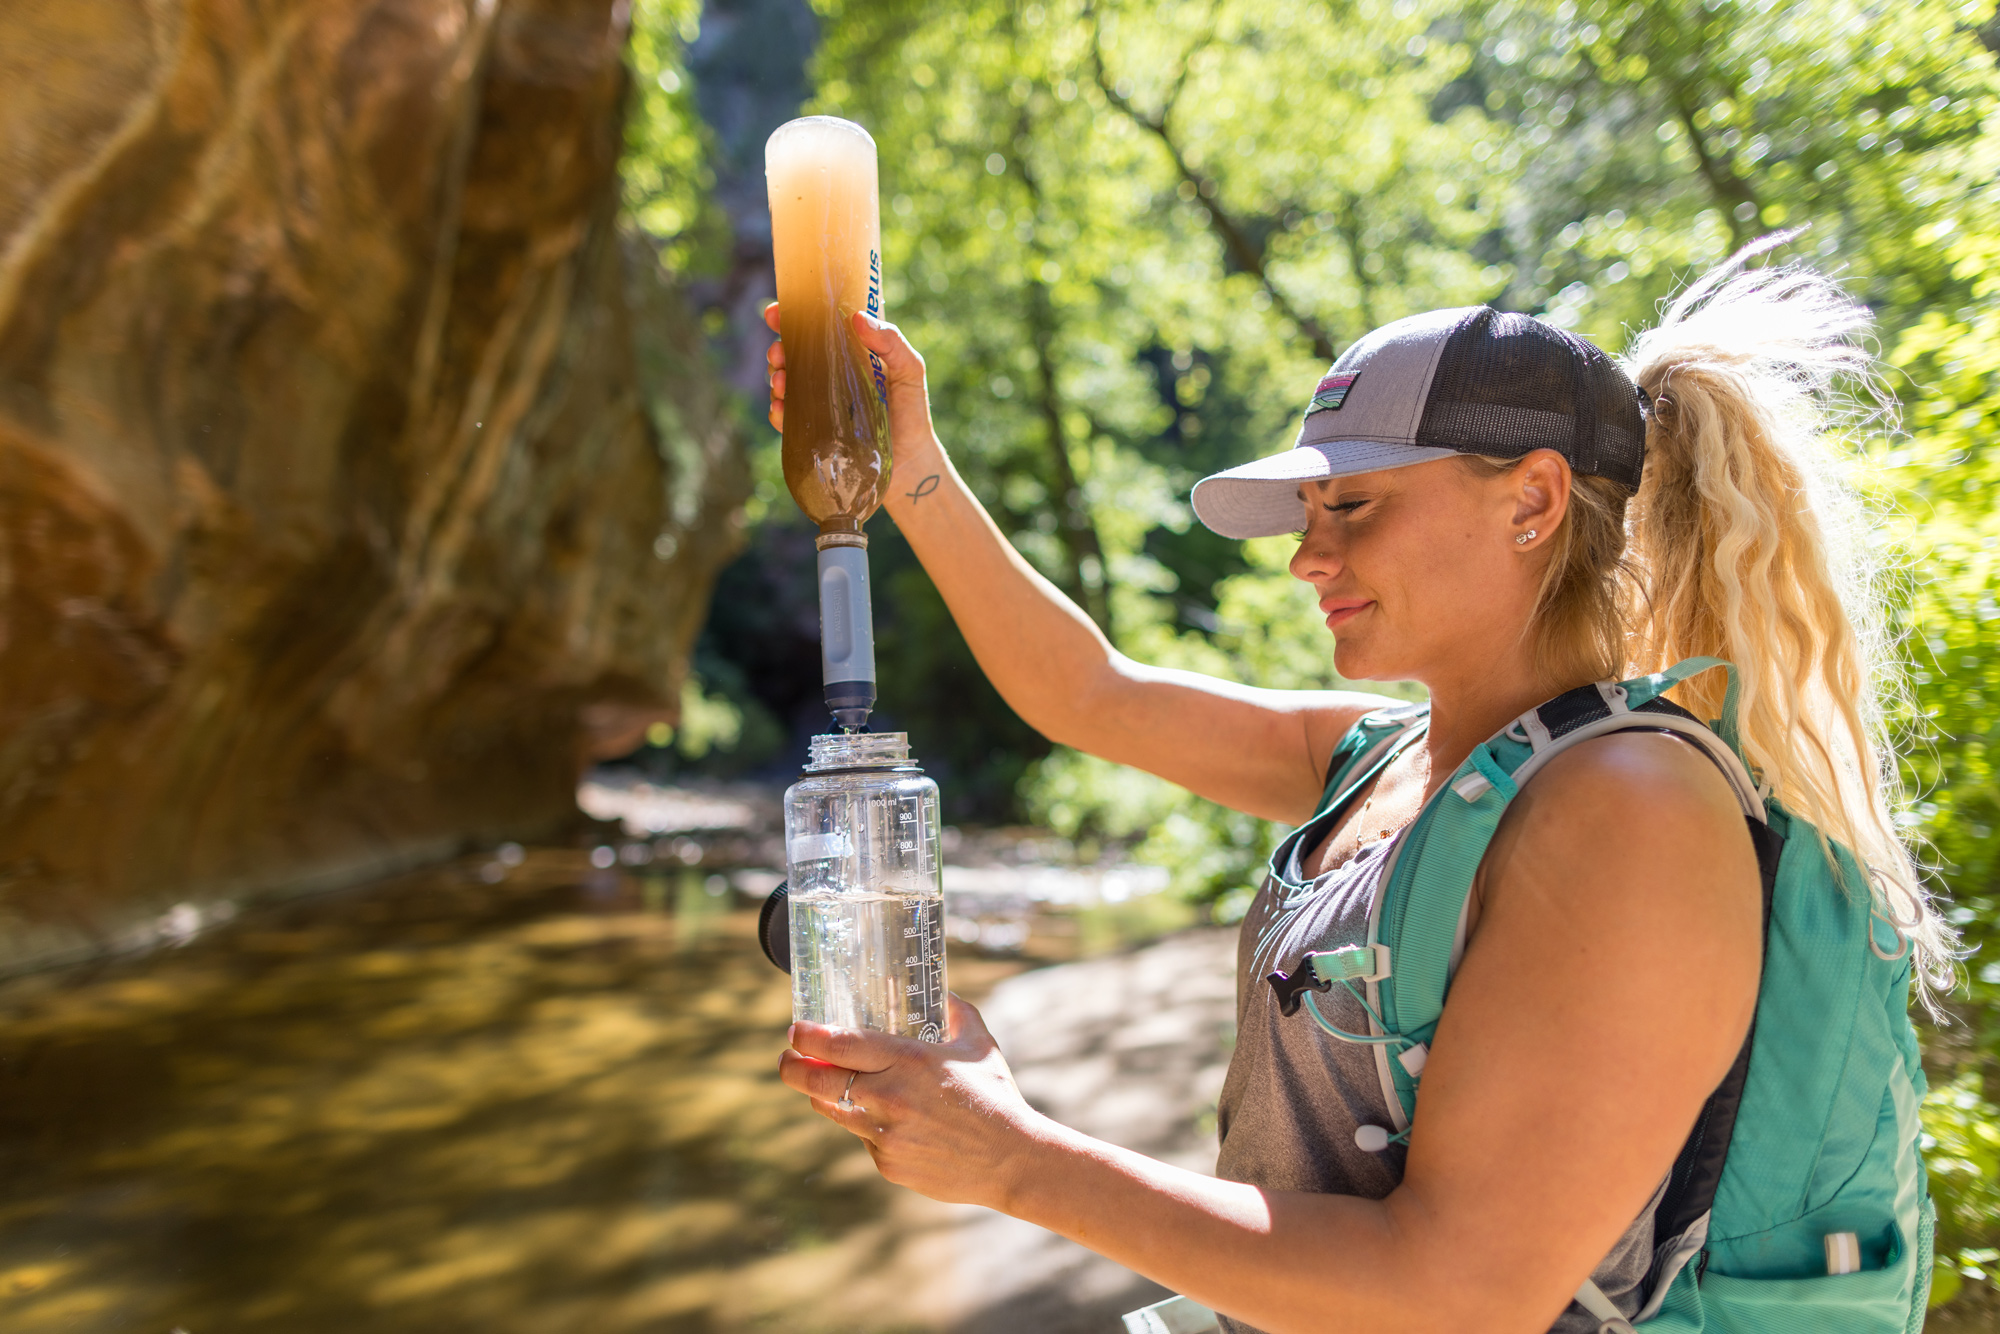 A woman filters water into a water bottle using the LifeStraw Peak Solo water filter with a river in the background.